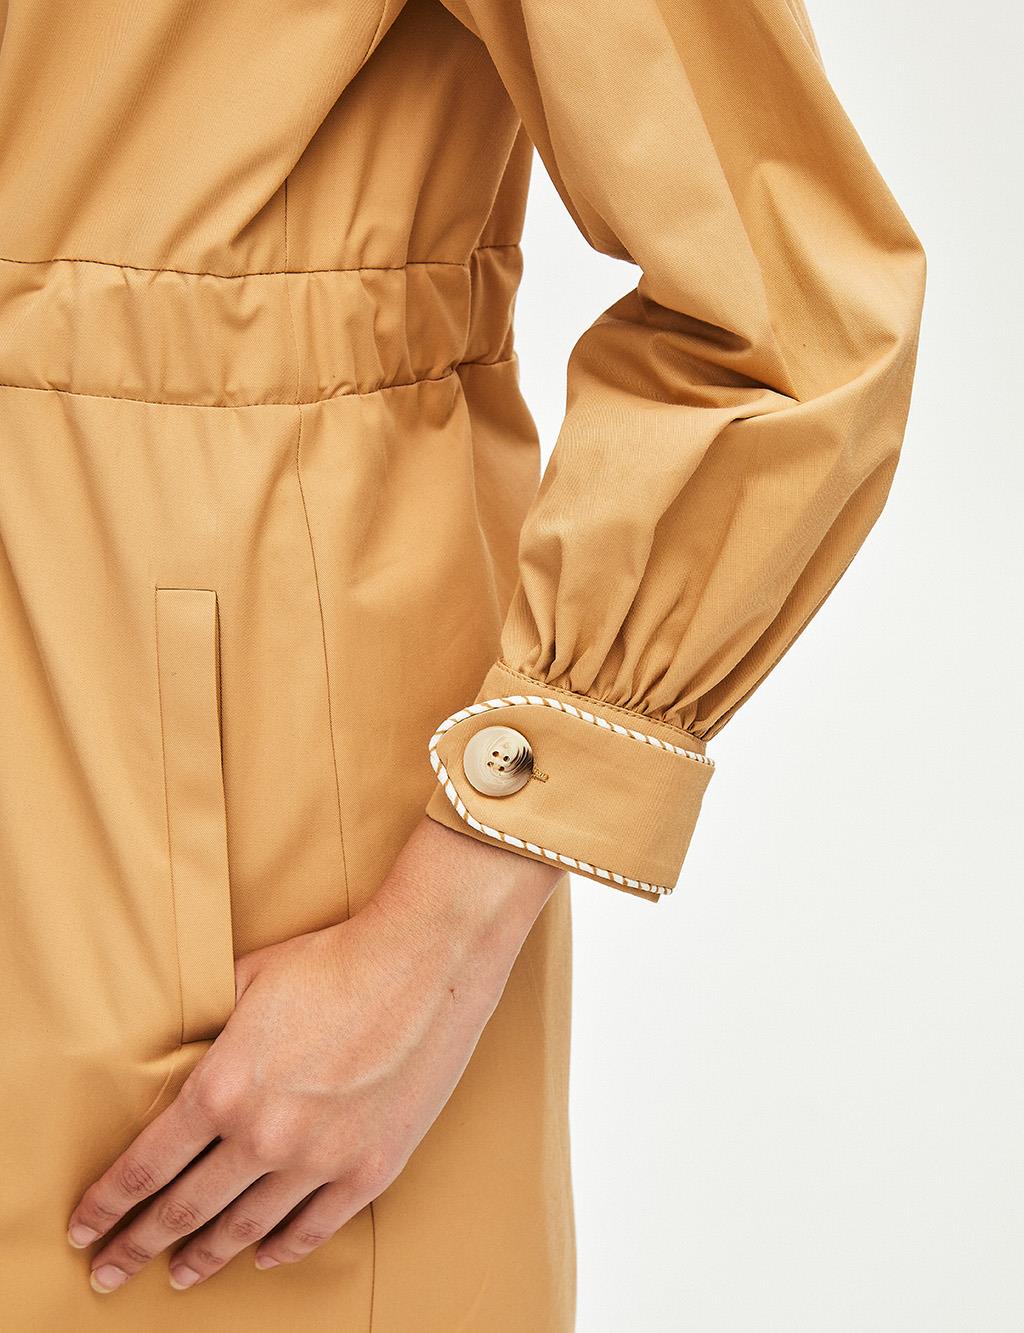 Belted Shirt Collar Trench Coat Beige